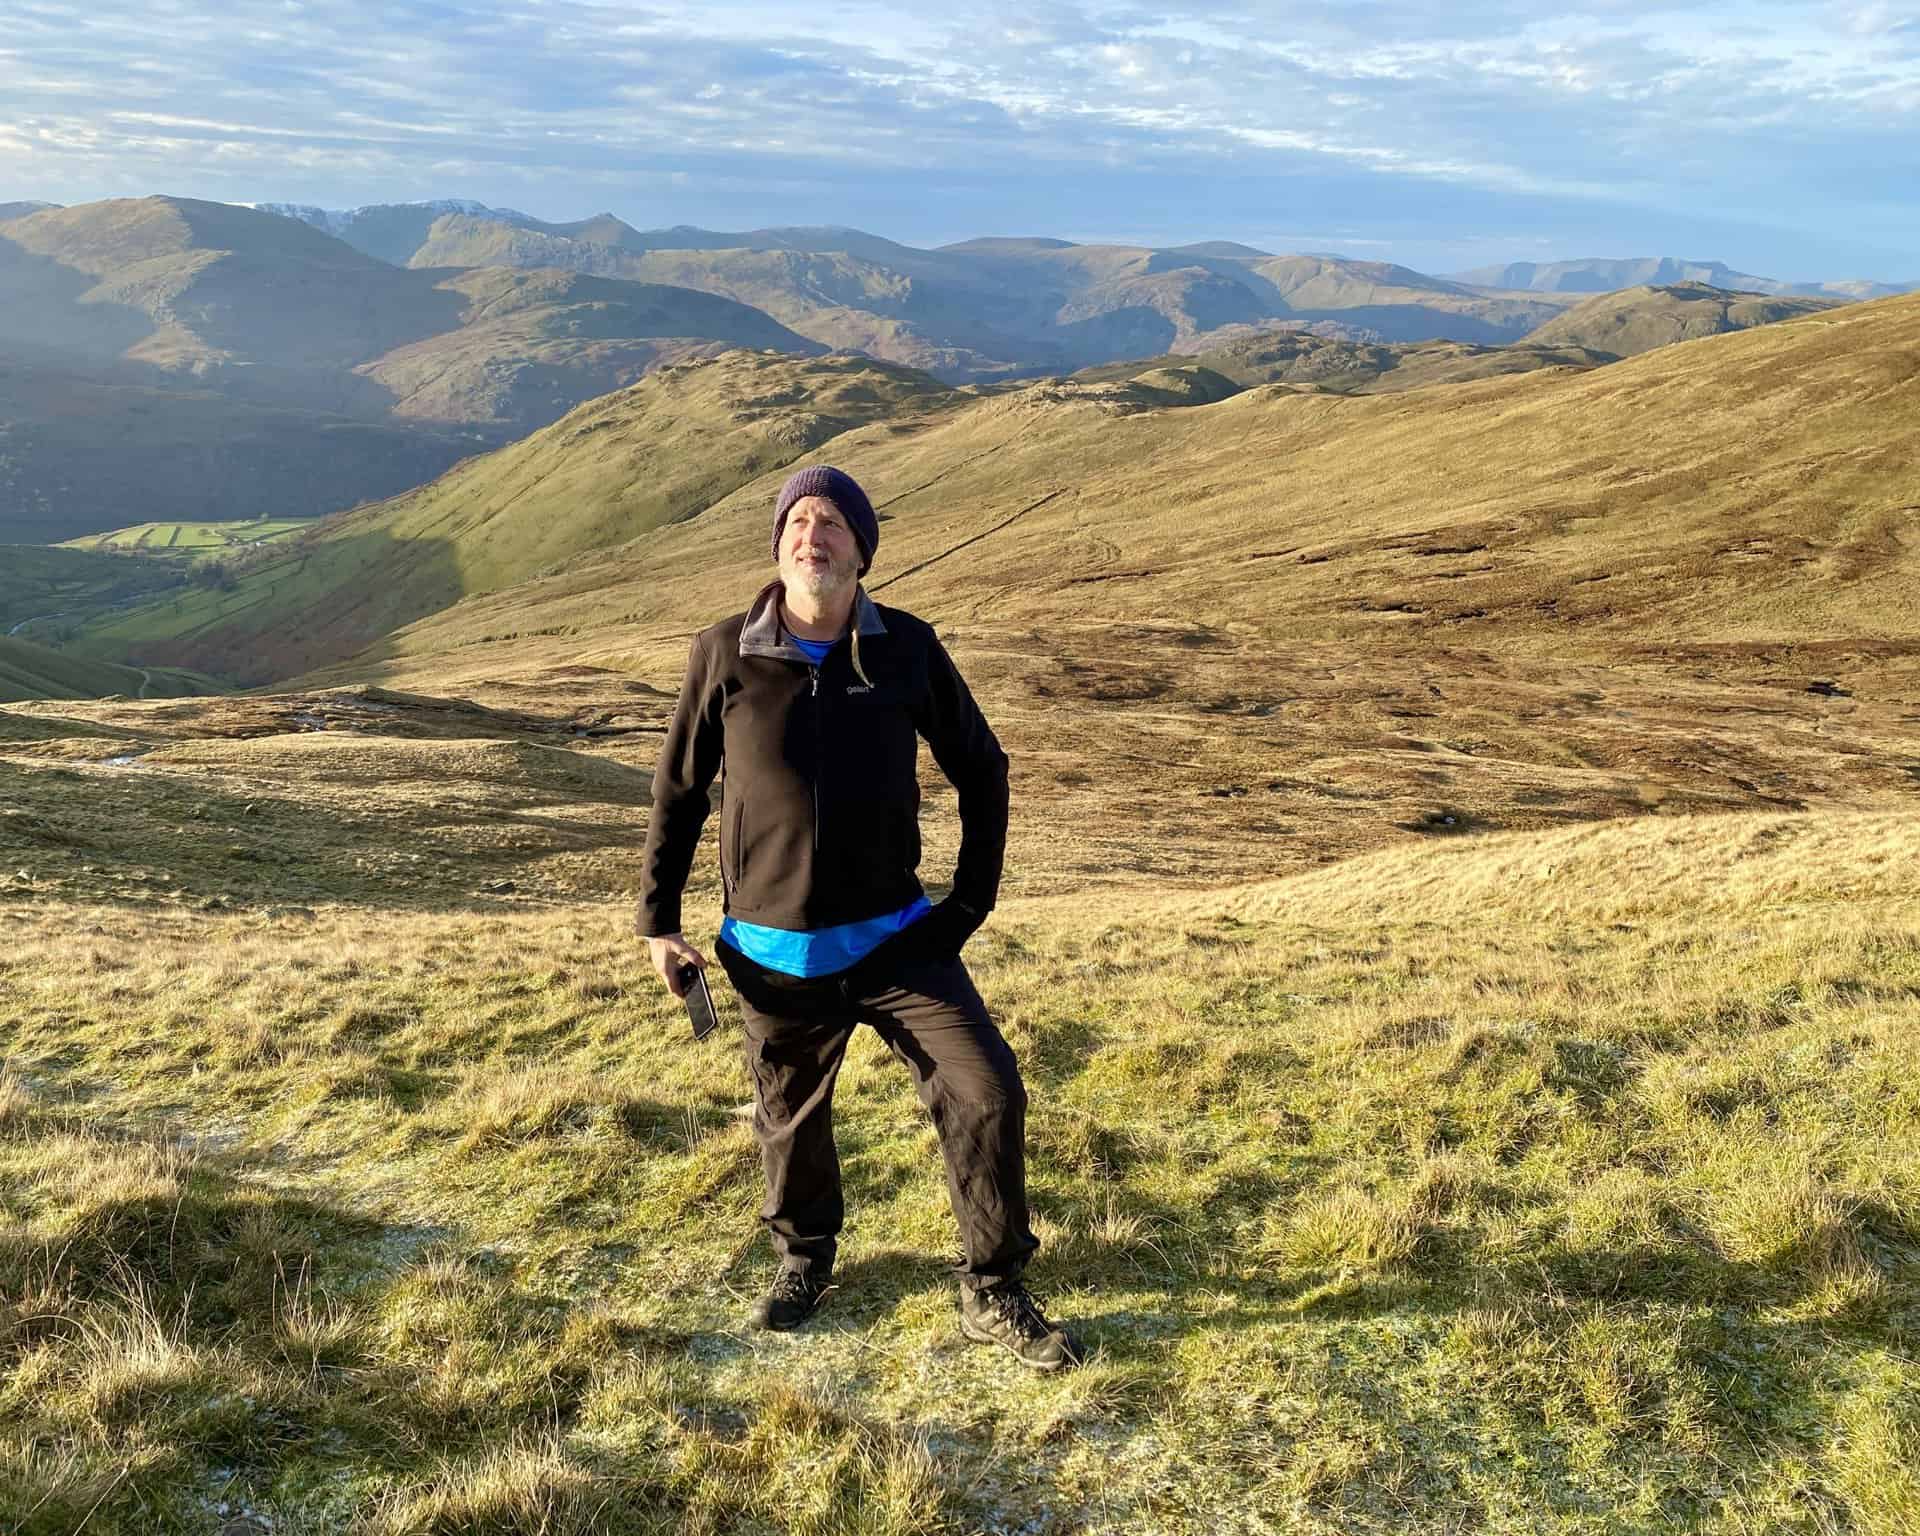 Kev strikes a pose on The Knott, height 739 metres (2425 feet). We are now three-quarters of the way round our Stony Cove Pike walk.